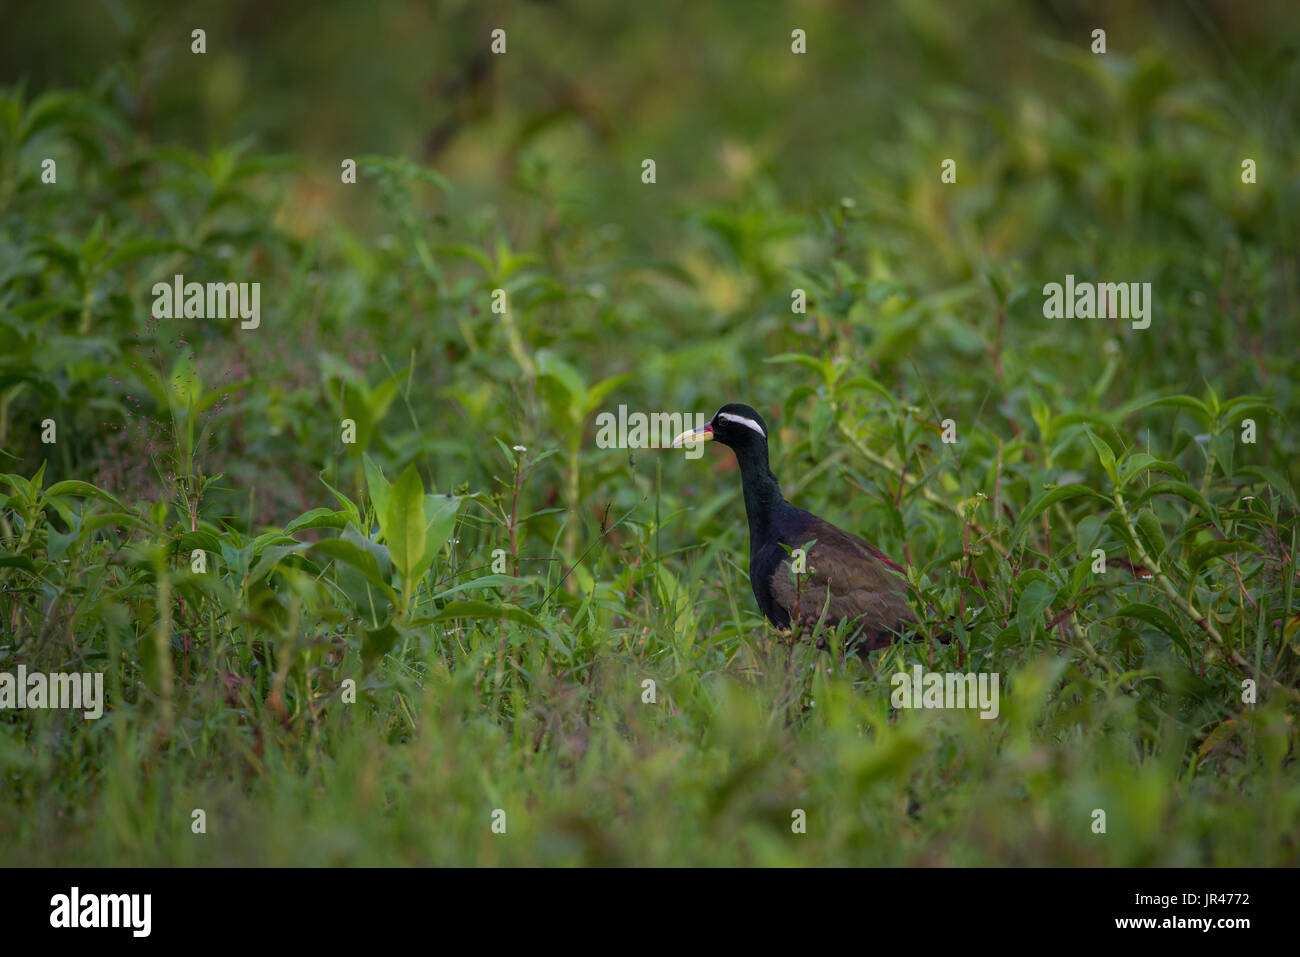 Bronze winged Jacana bird in its habitat in search of food Stock Photo